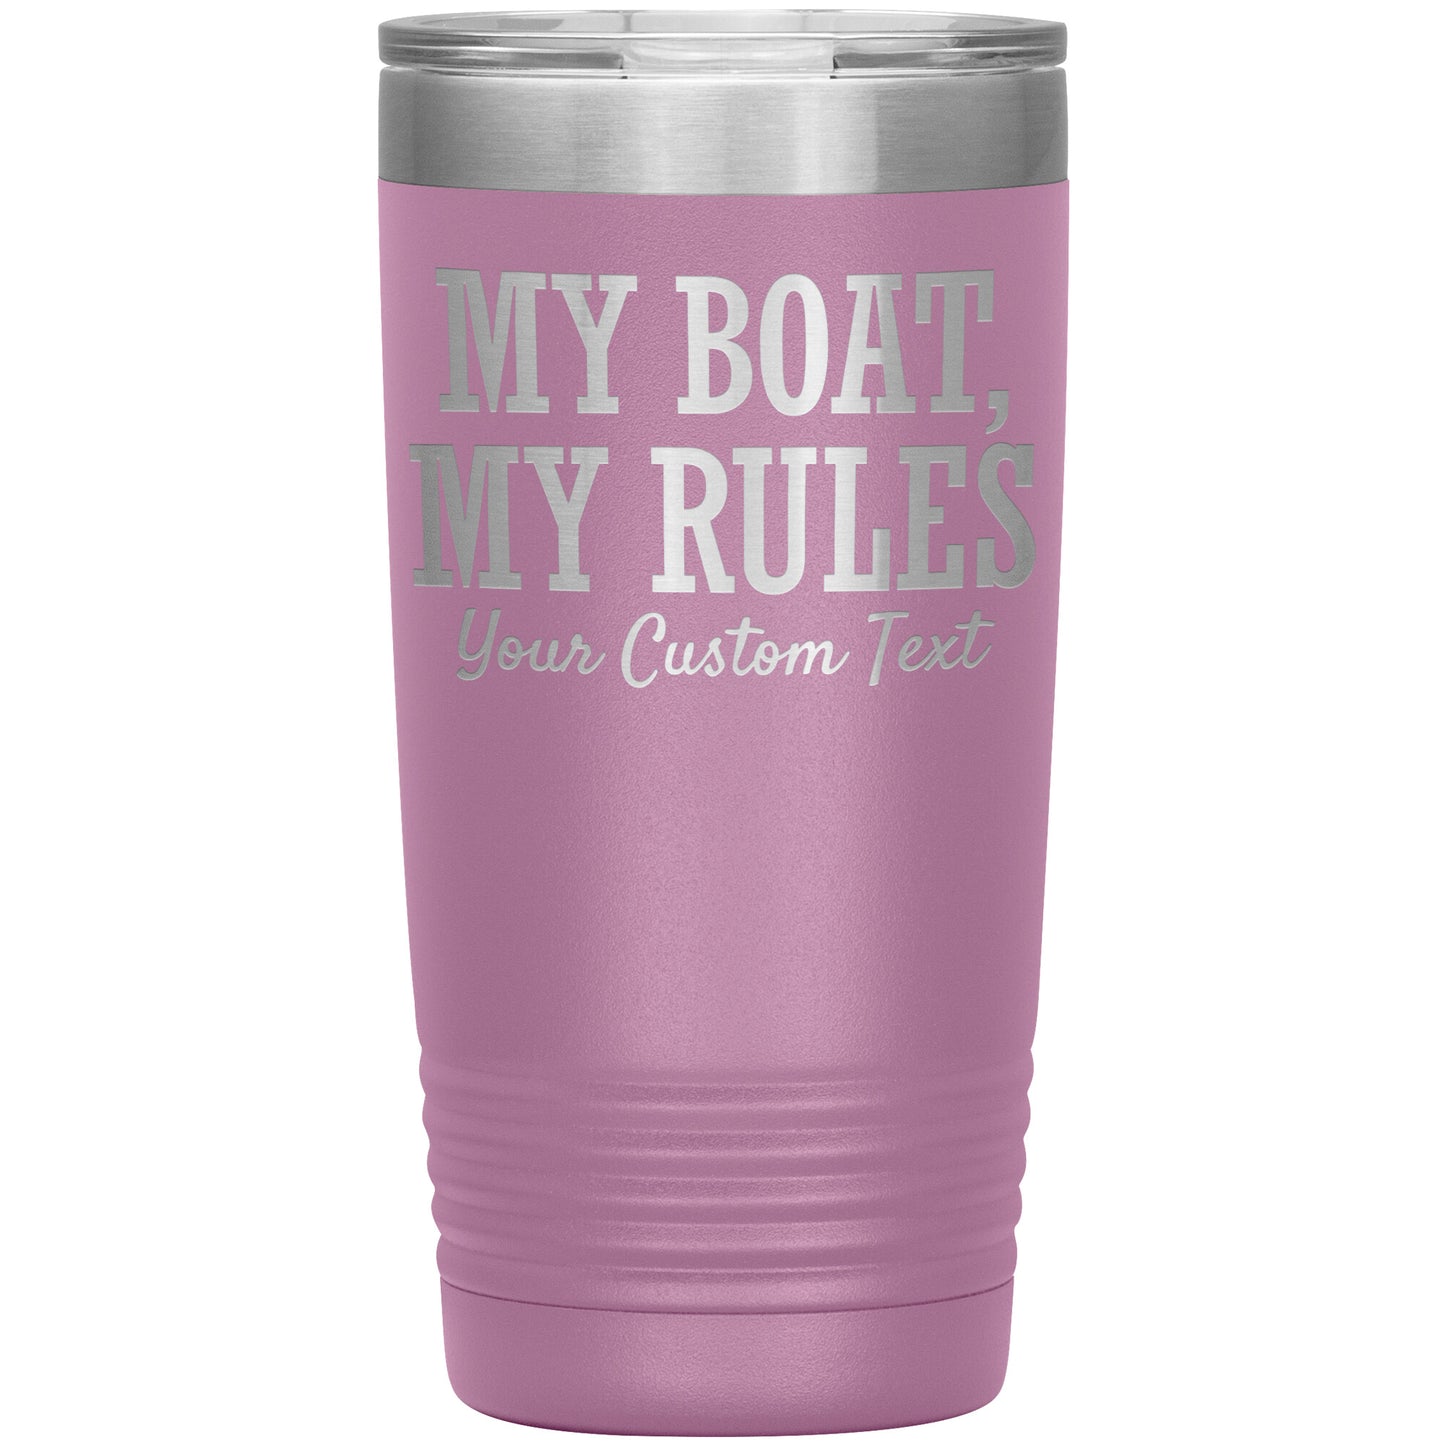 Personalized My Boat My Rules Drink Tumbler - Smith Mountain Lake Gift